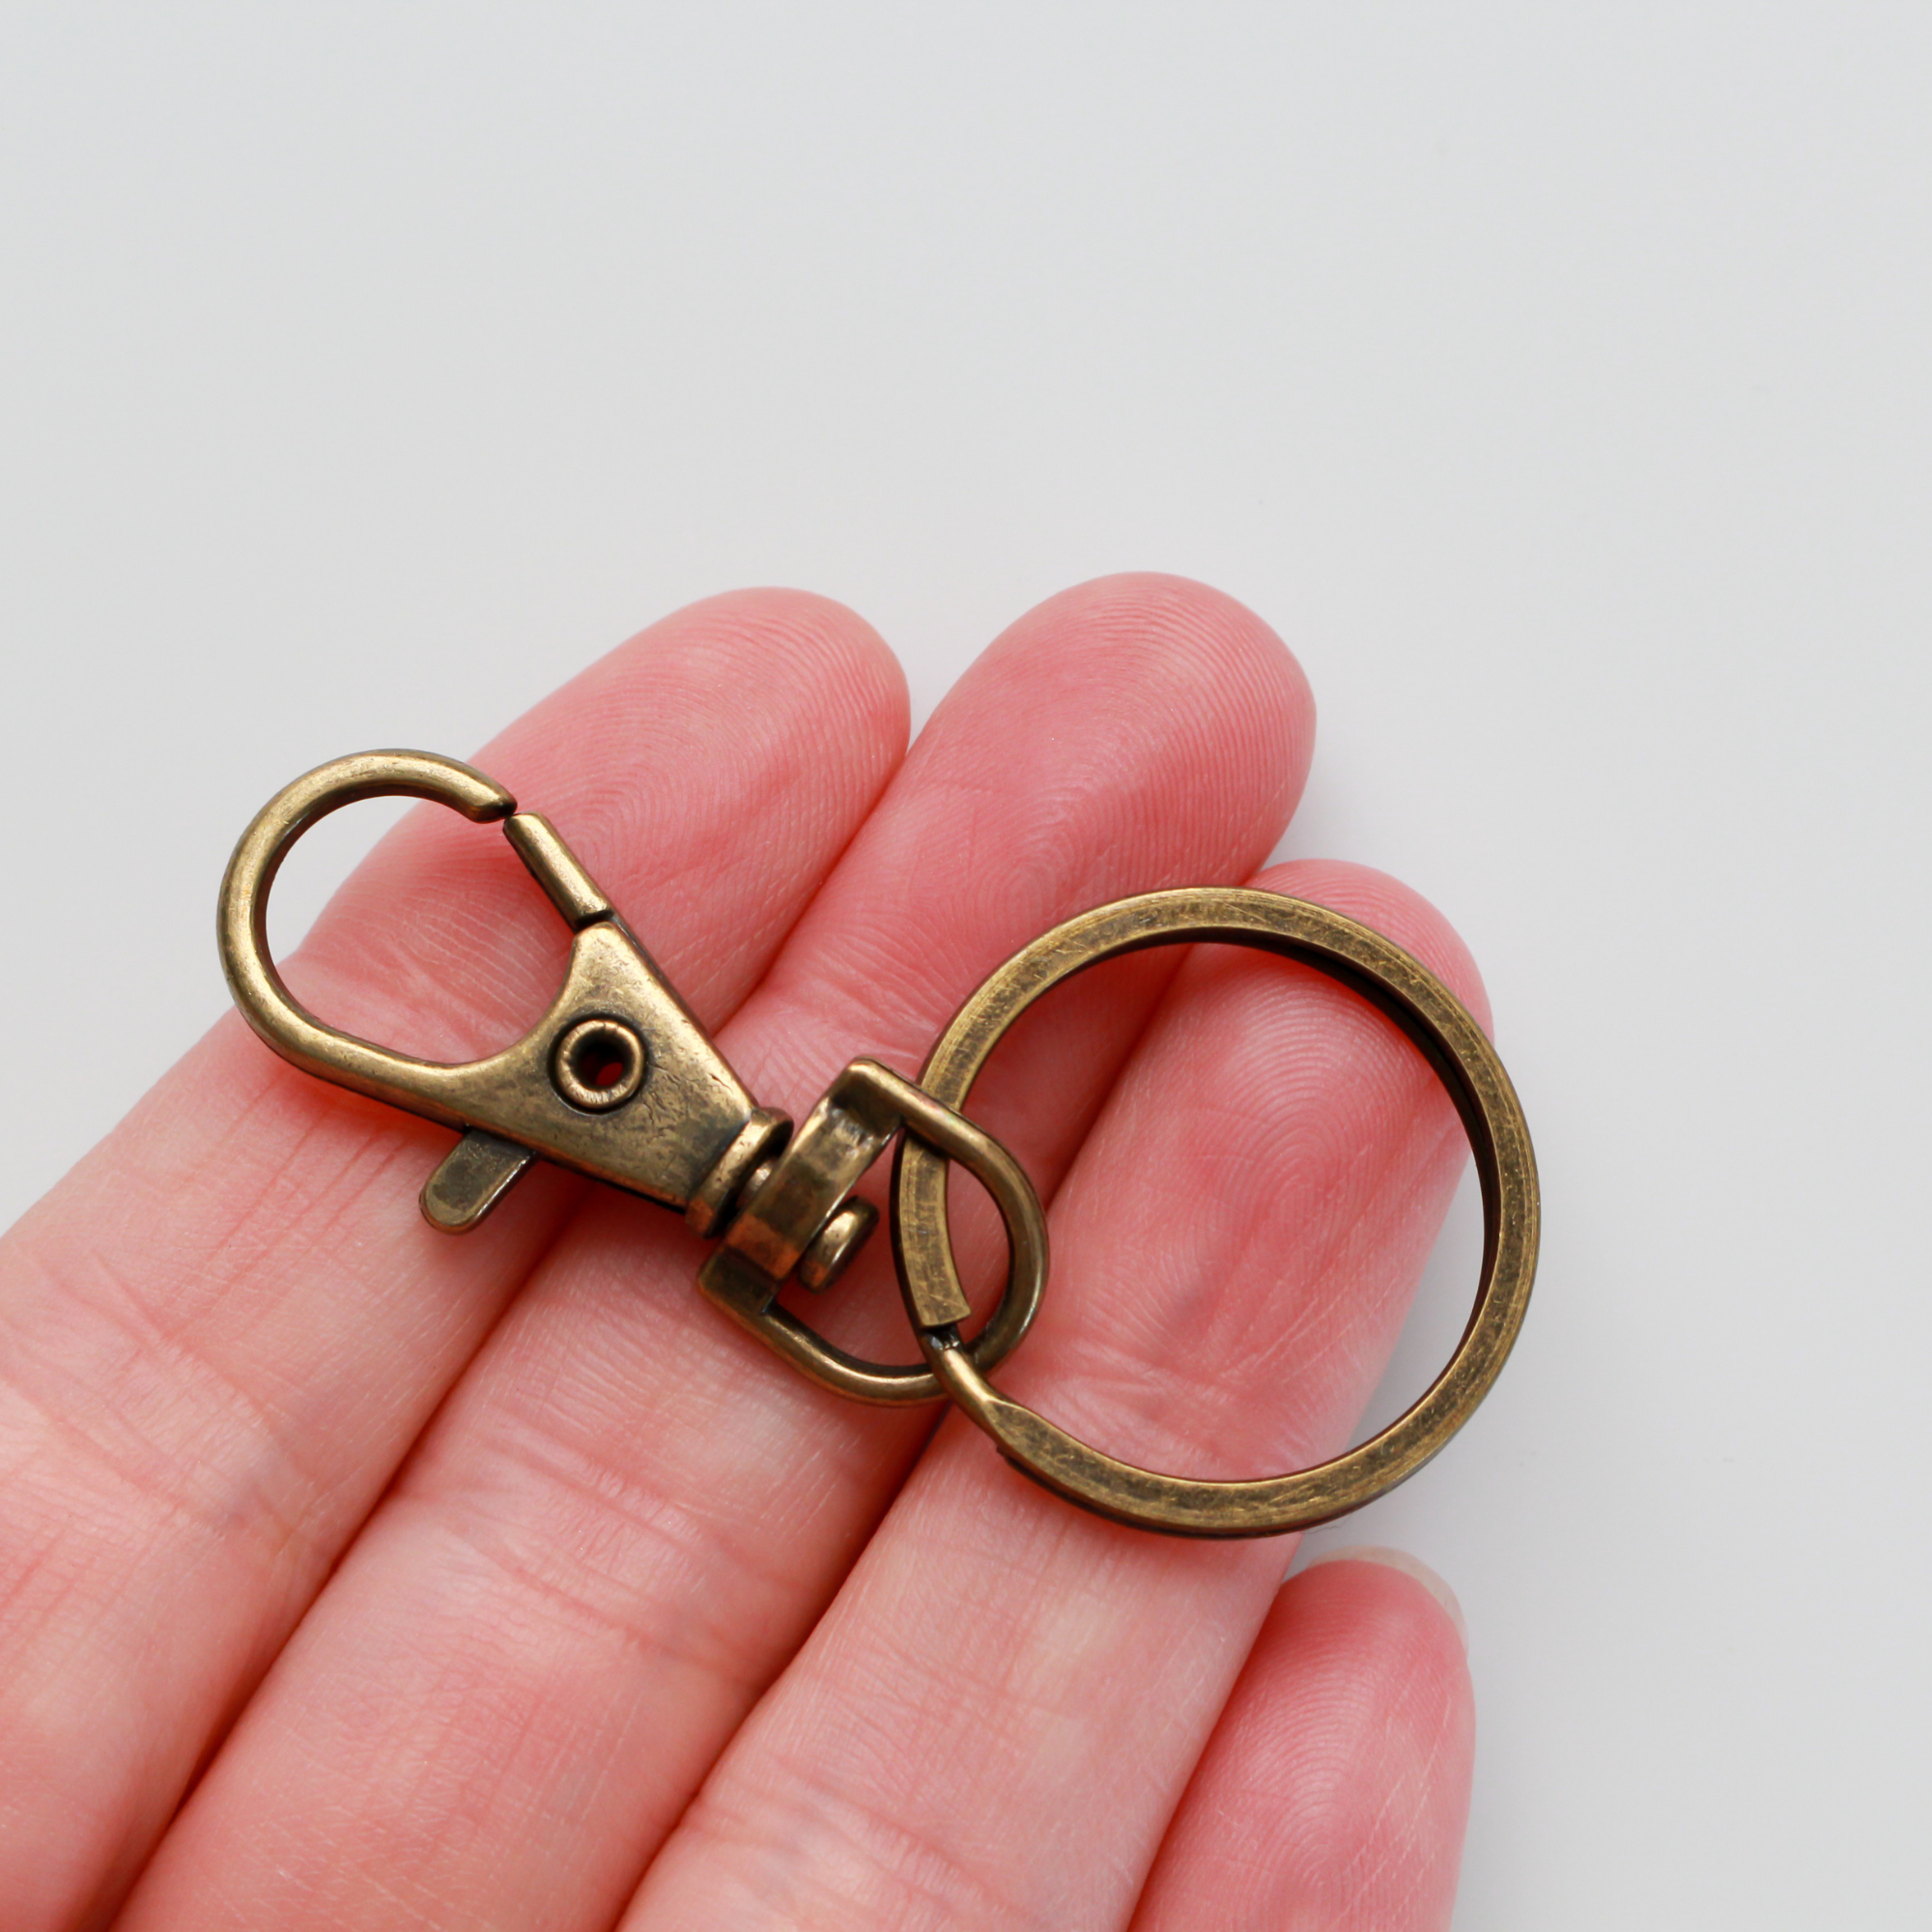 Key Ring with Swivel Lobster Claw Clasp - Antiqued Bronze Tone Keychain